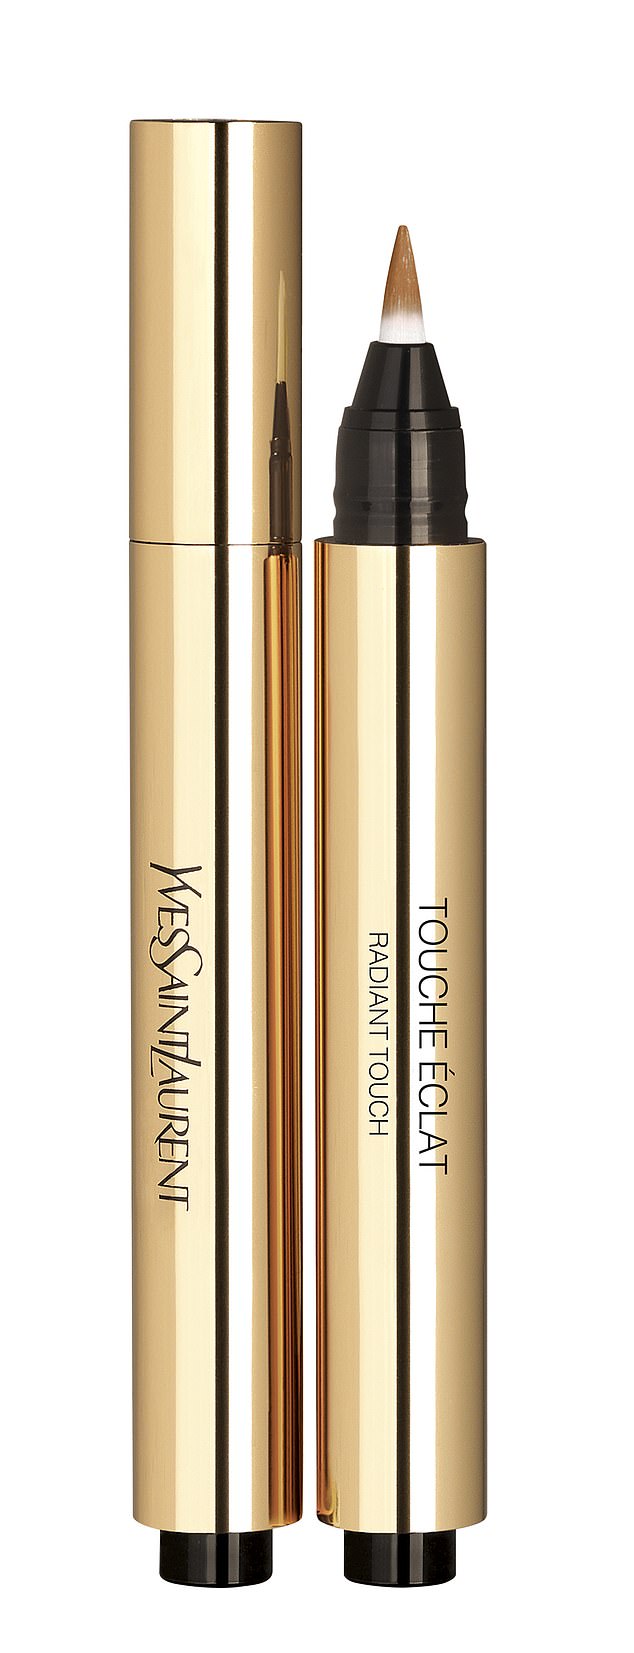 YSL Touche Eclat (£27, boots.com) 'works miracles', says Davina, and doesn't 'go too heavy' around wrinkles